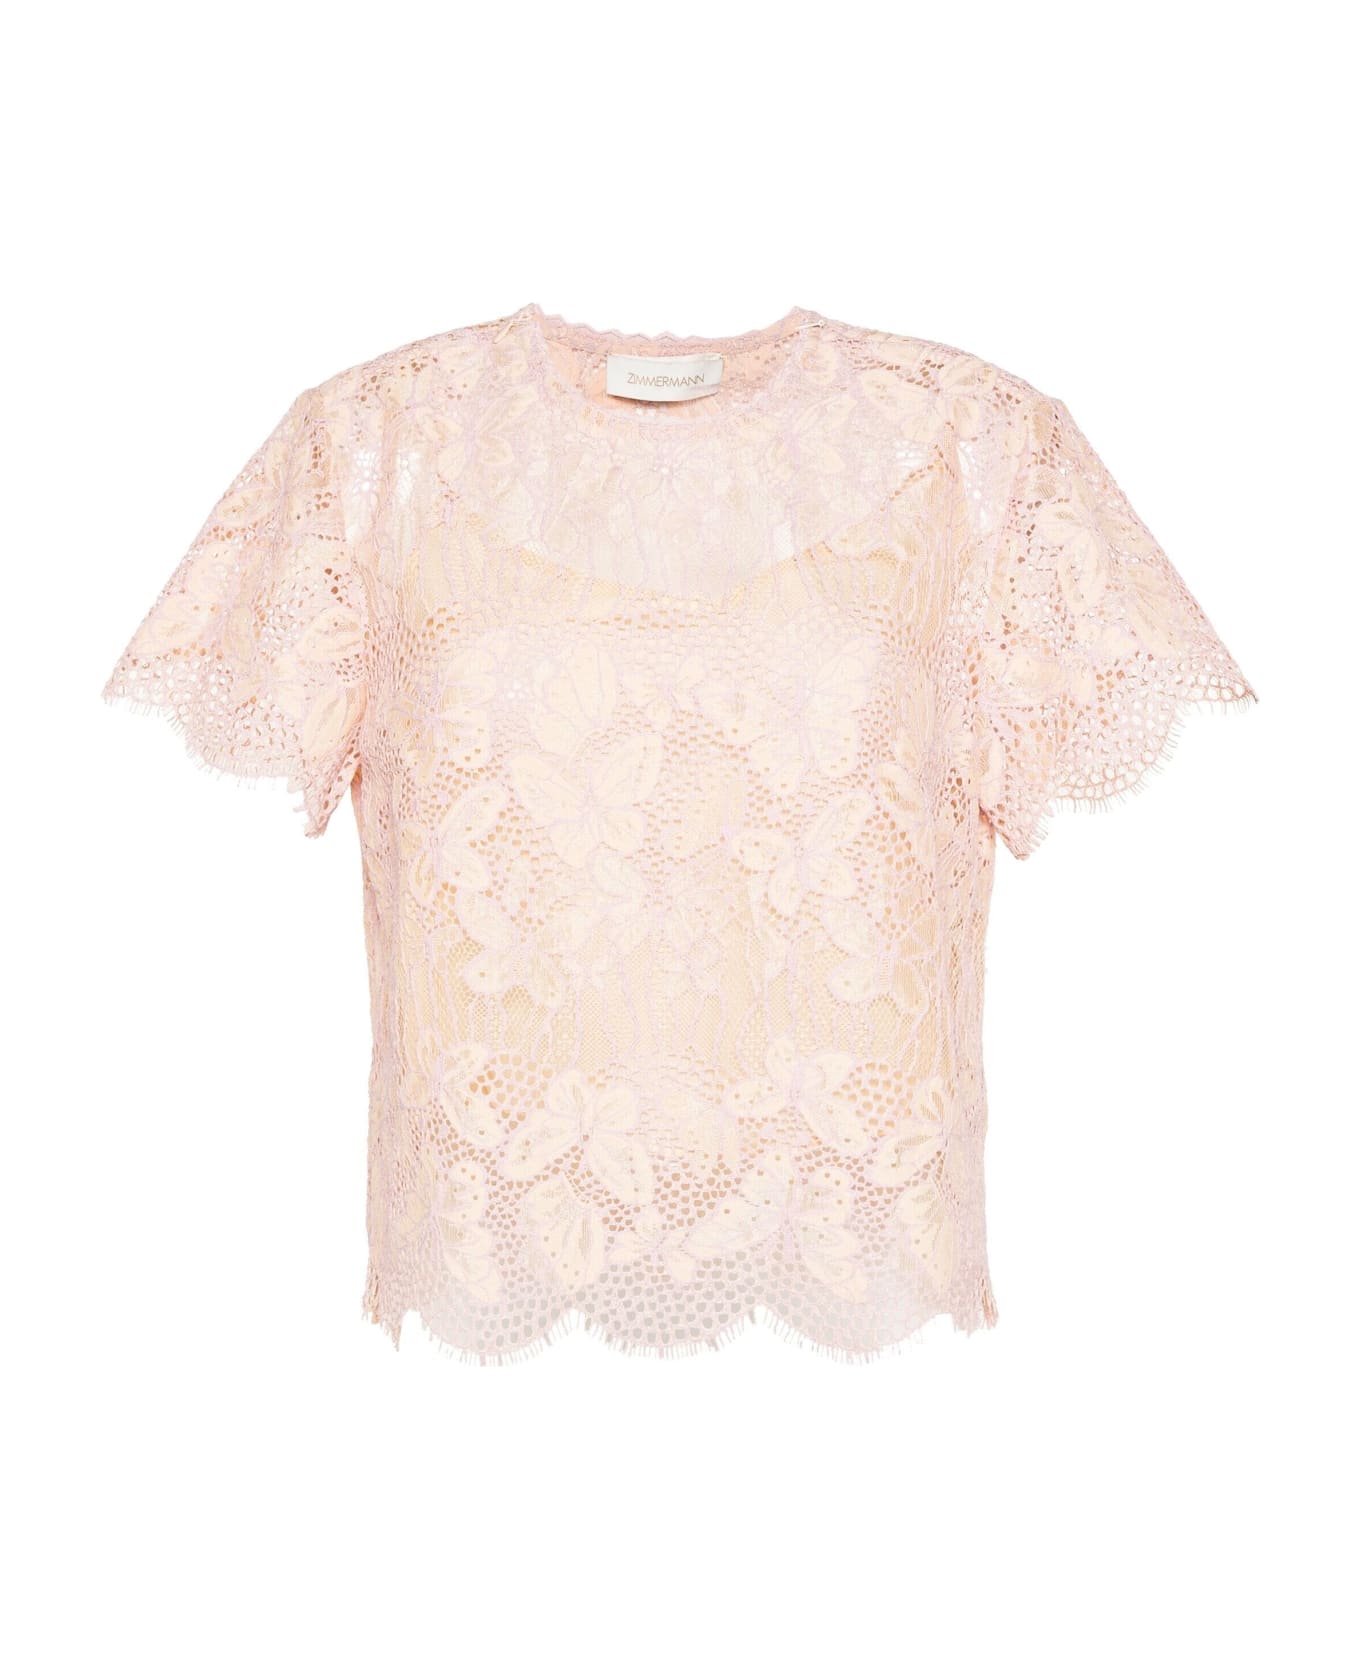 Zimmermann Top M/m In Pizzo - Orc Orchid